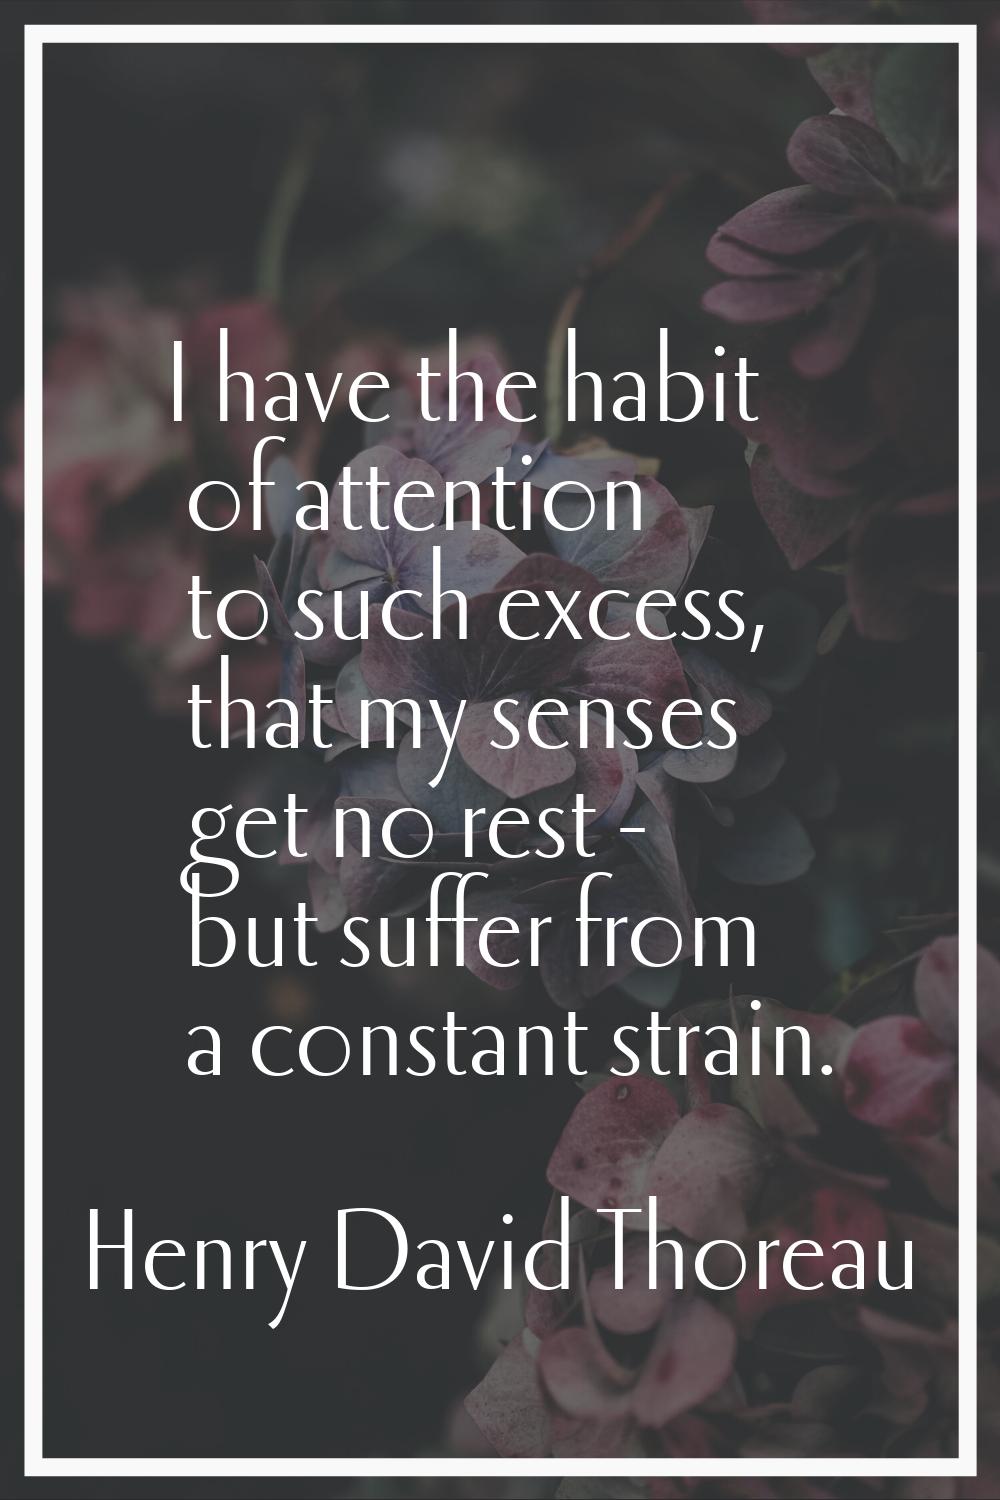 I have the habit of attention to such excess, that my senses get no rest - but suffer from a consta